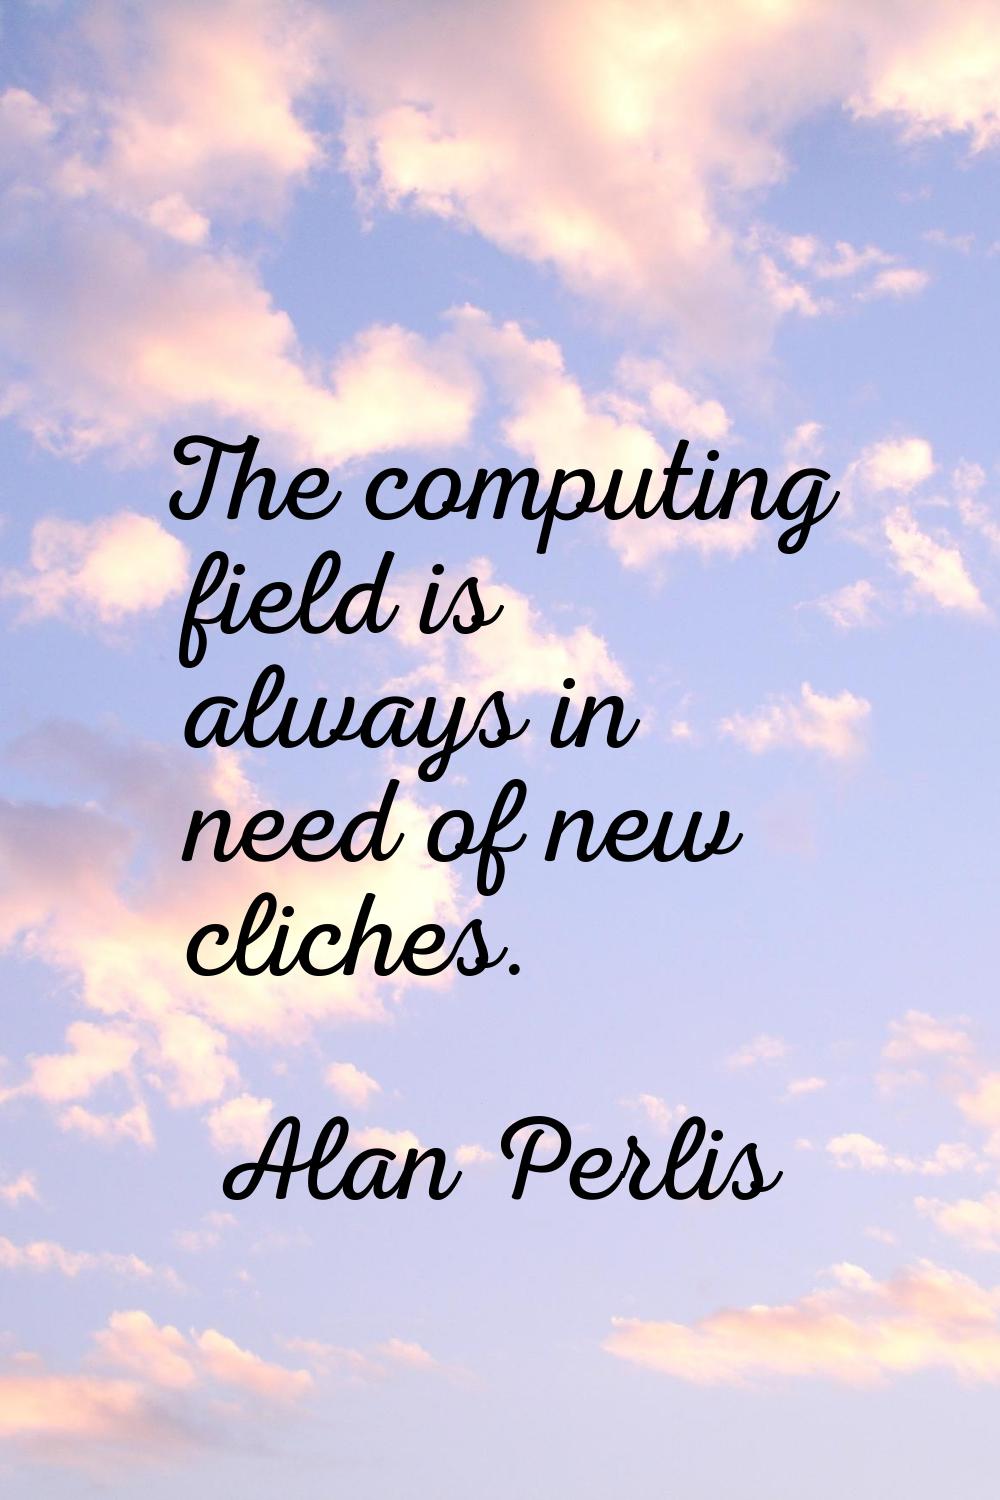 The computing field is always in need of new cliches.